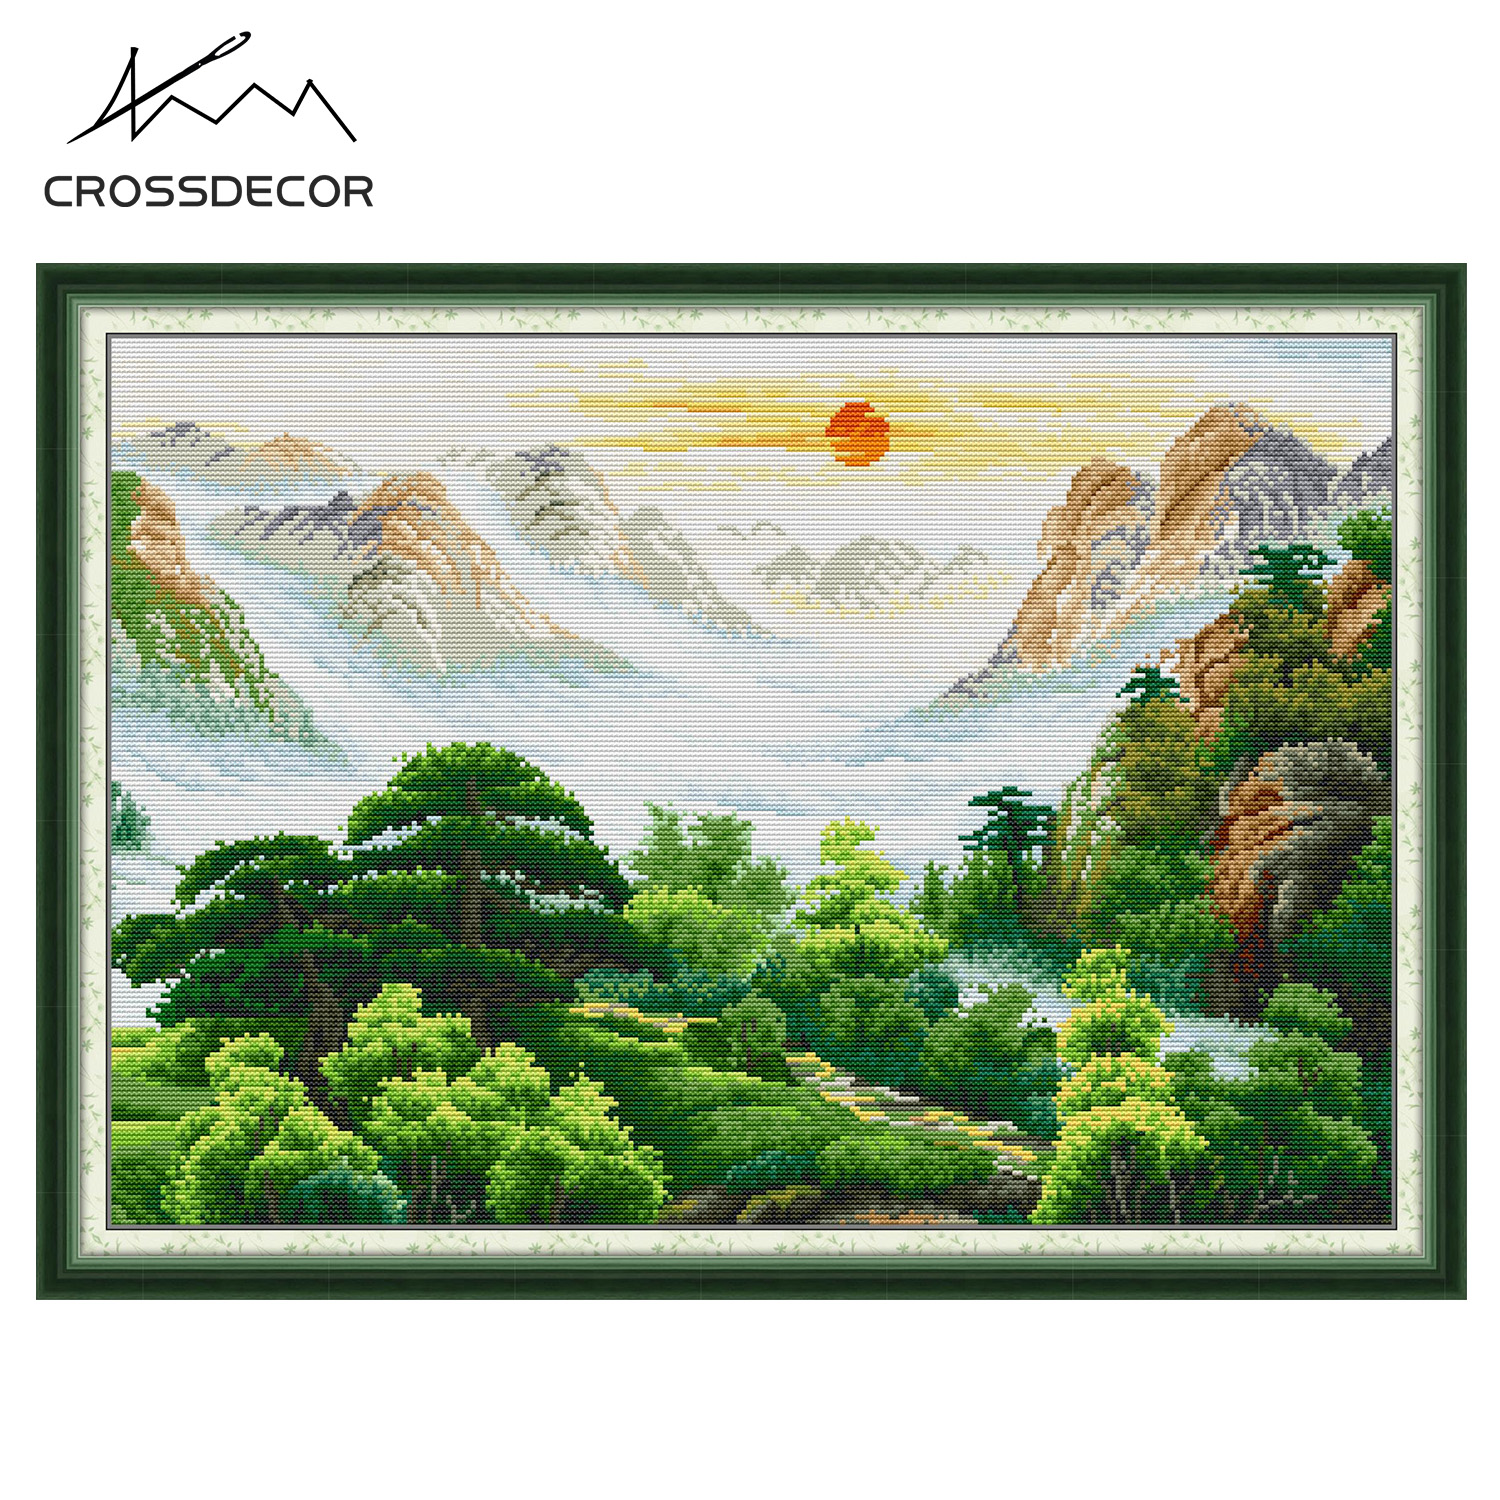 Stamped Cross Stitch Kits for Adults Beginner-Counted Cross Stitch Kit  Trees and Mountain Waterfall 11CT Pre-Printed Pattern Fabric Embroidery  Crafts